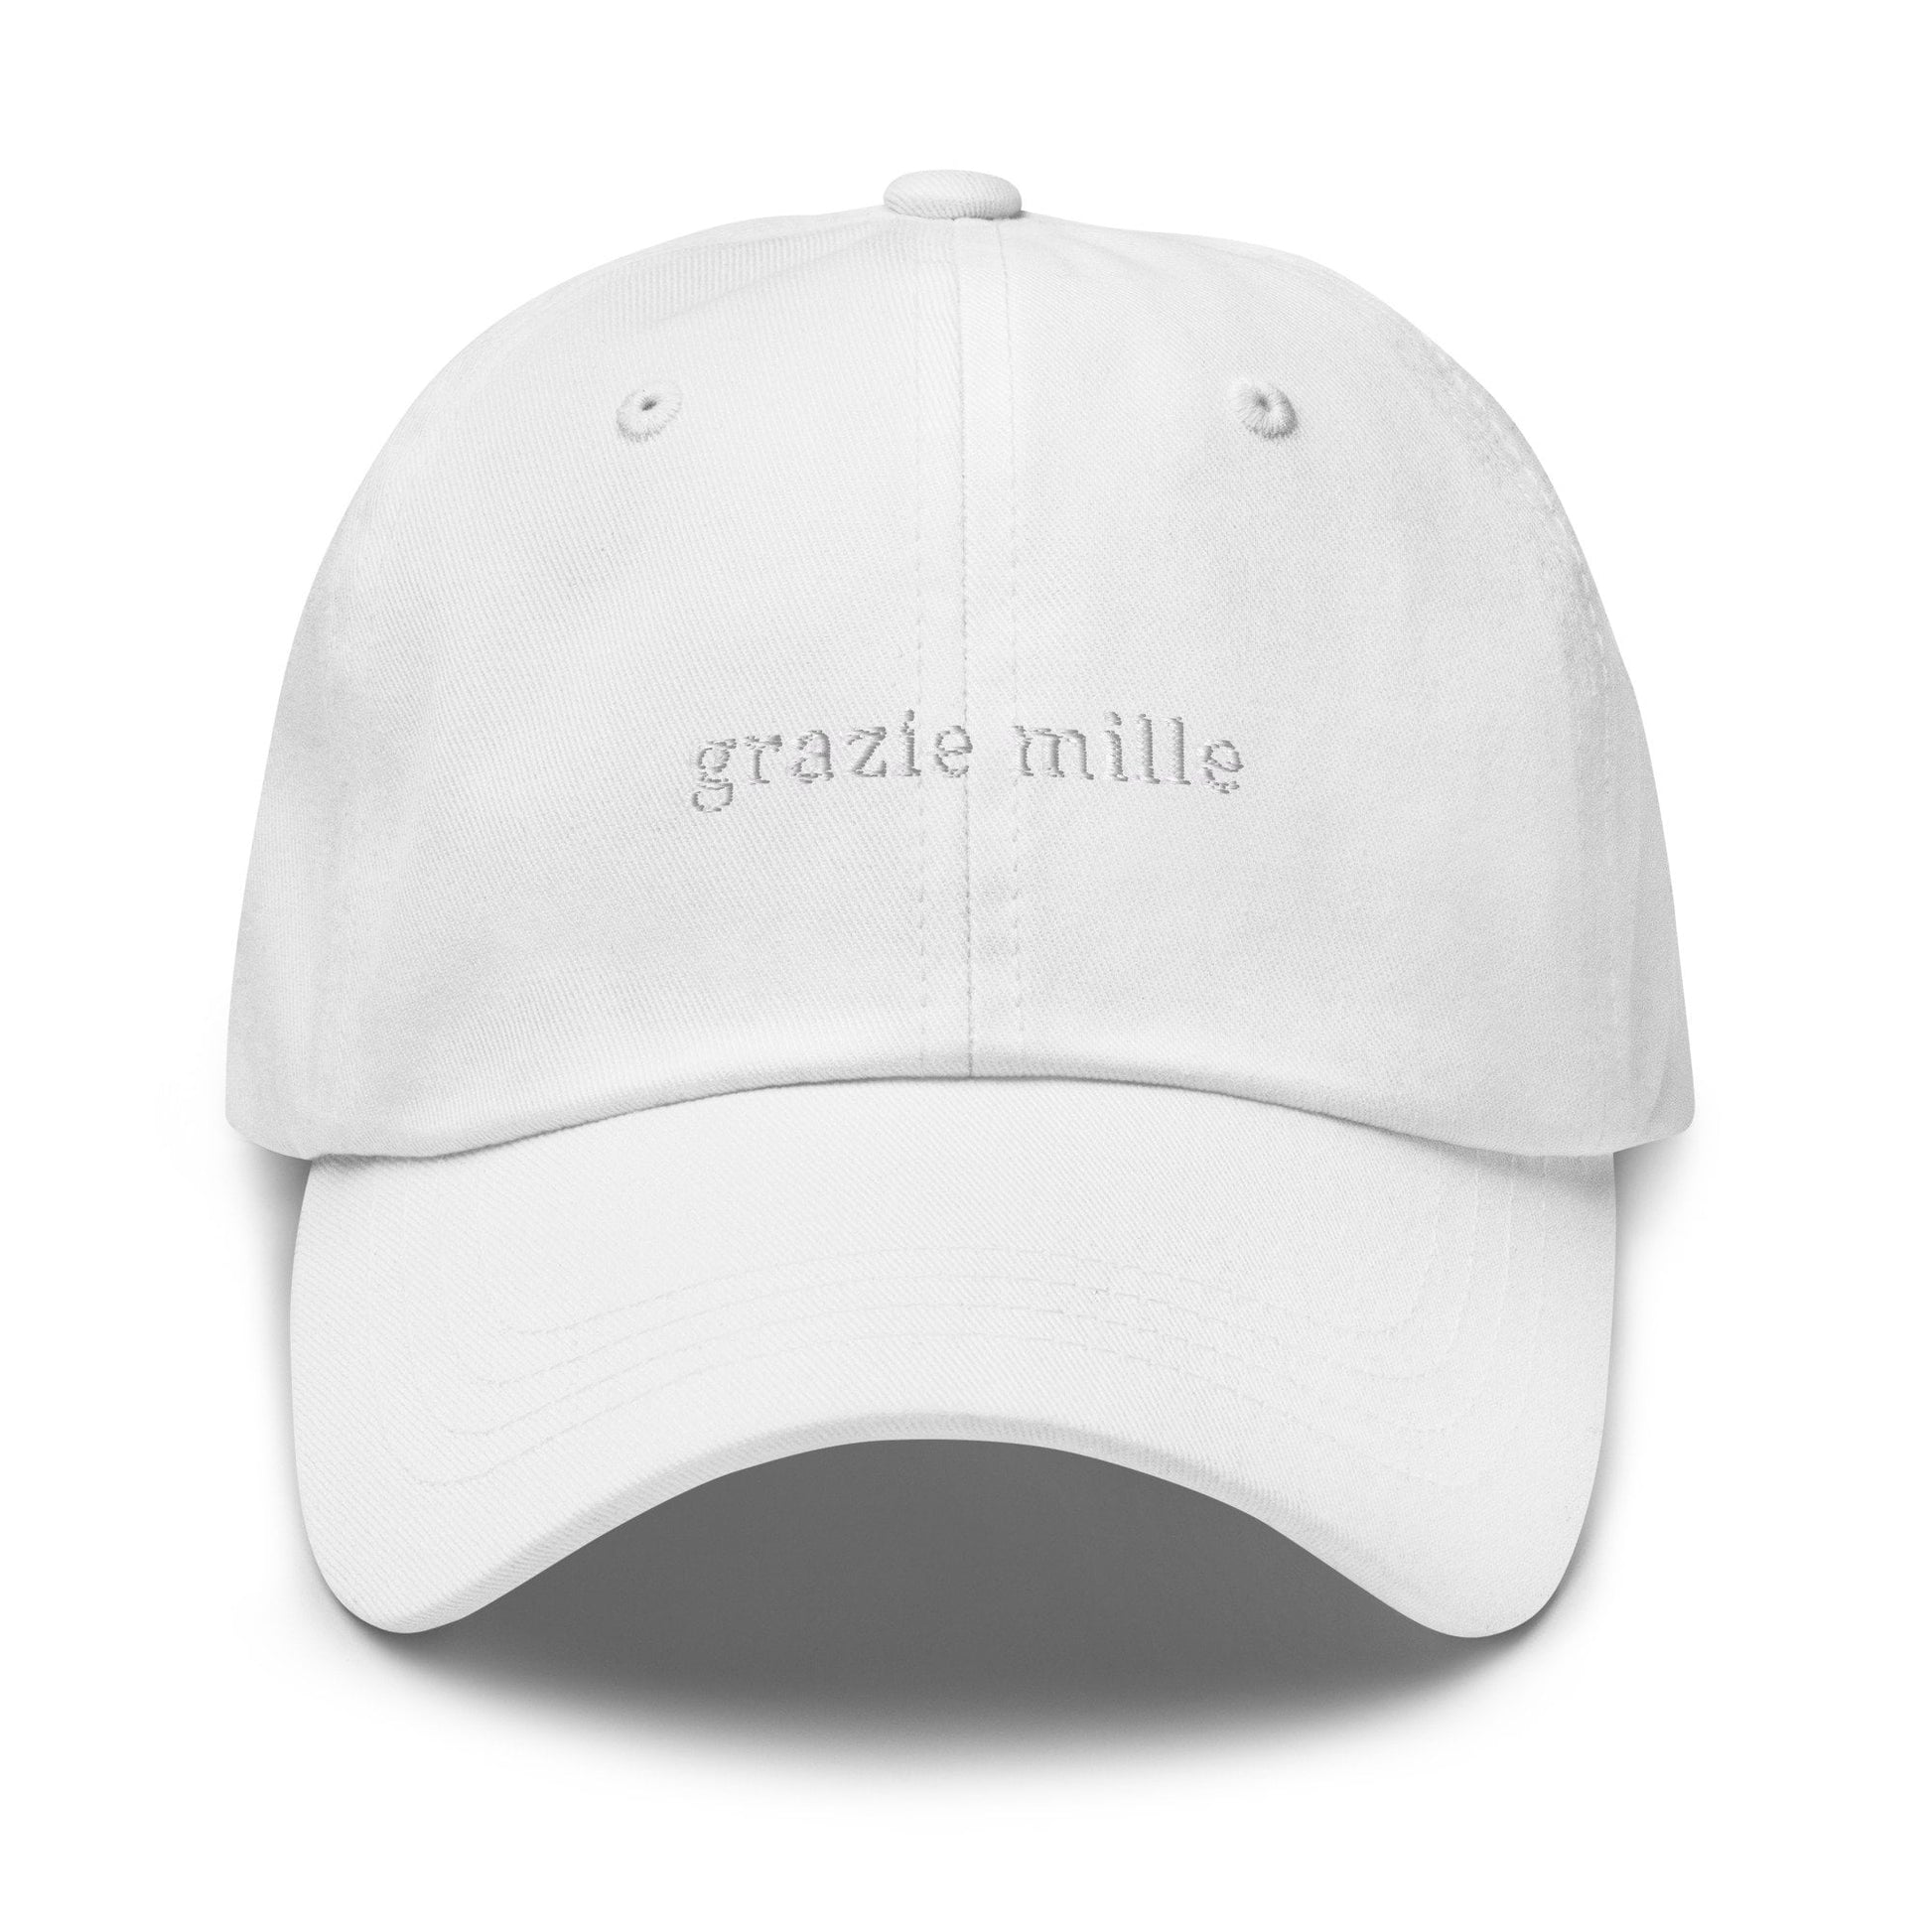 Grazie Hat - Italian Thank You - Embroidered Cotton Baseball Hat - Multiple Colors